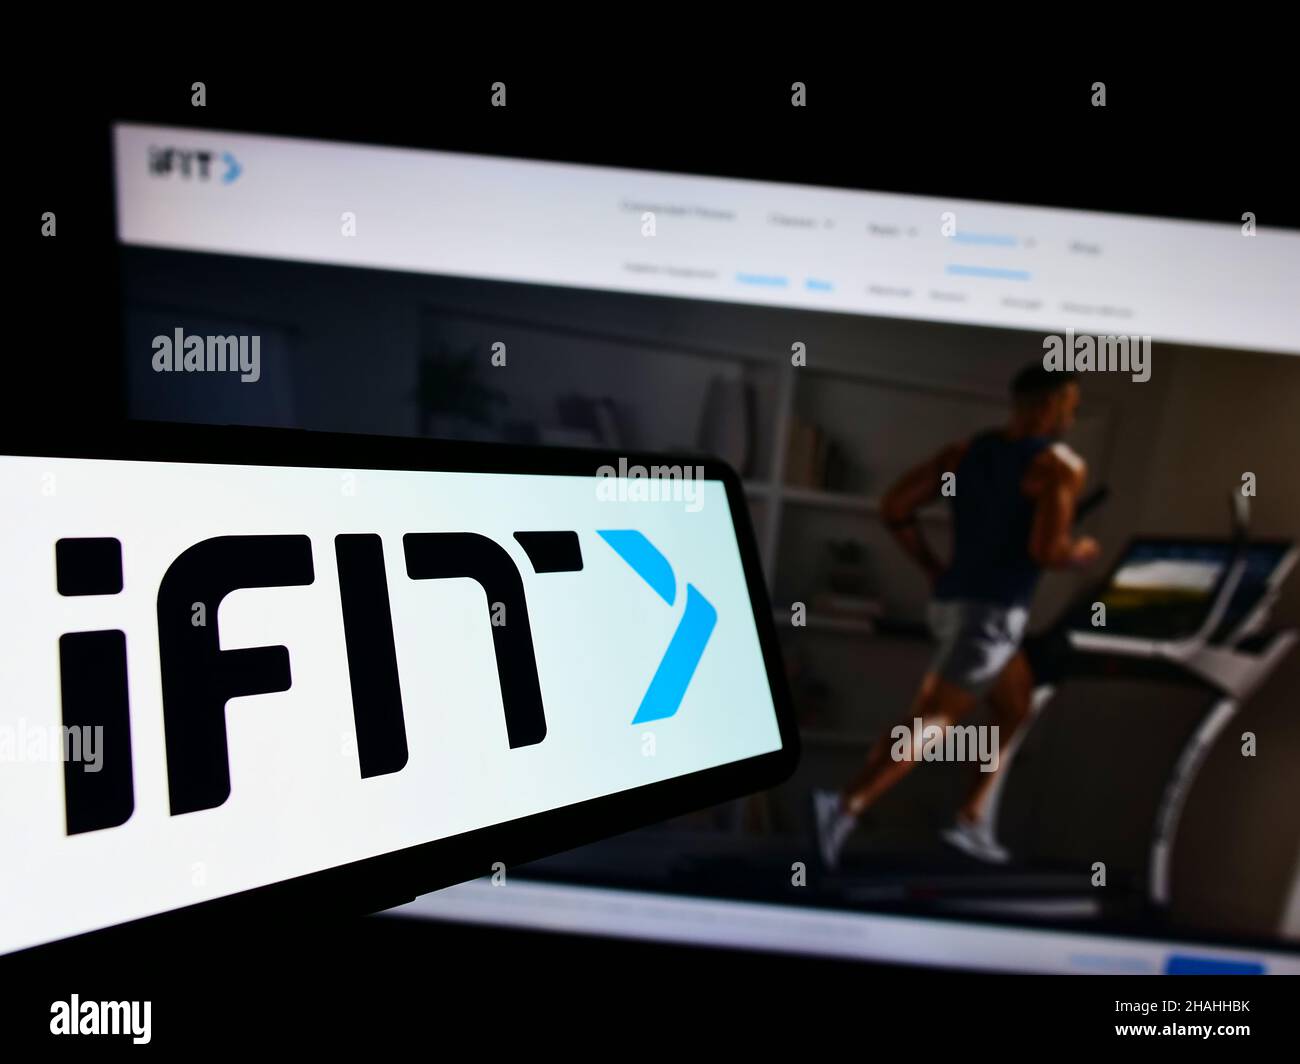 Mobile phone with logo of American fitness company iFIT Inc. on screen in front of business website. Focus on center of phone display. Stock Photo